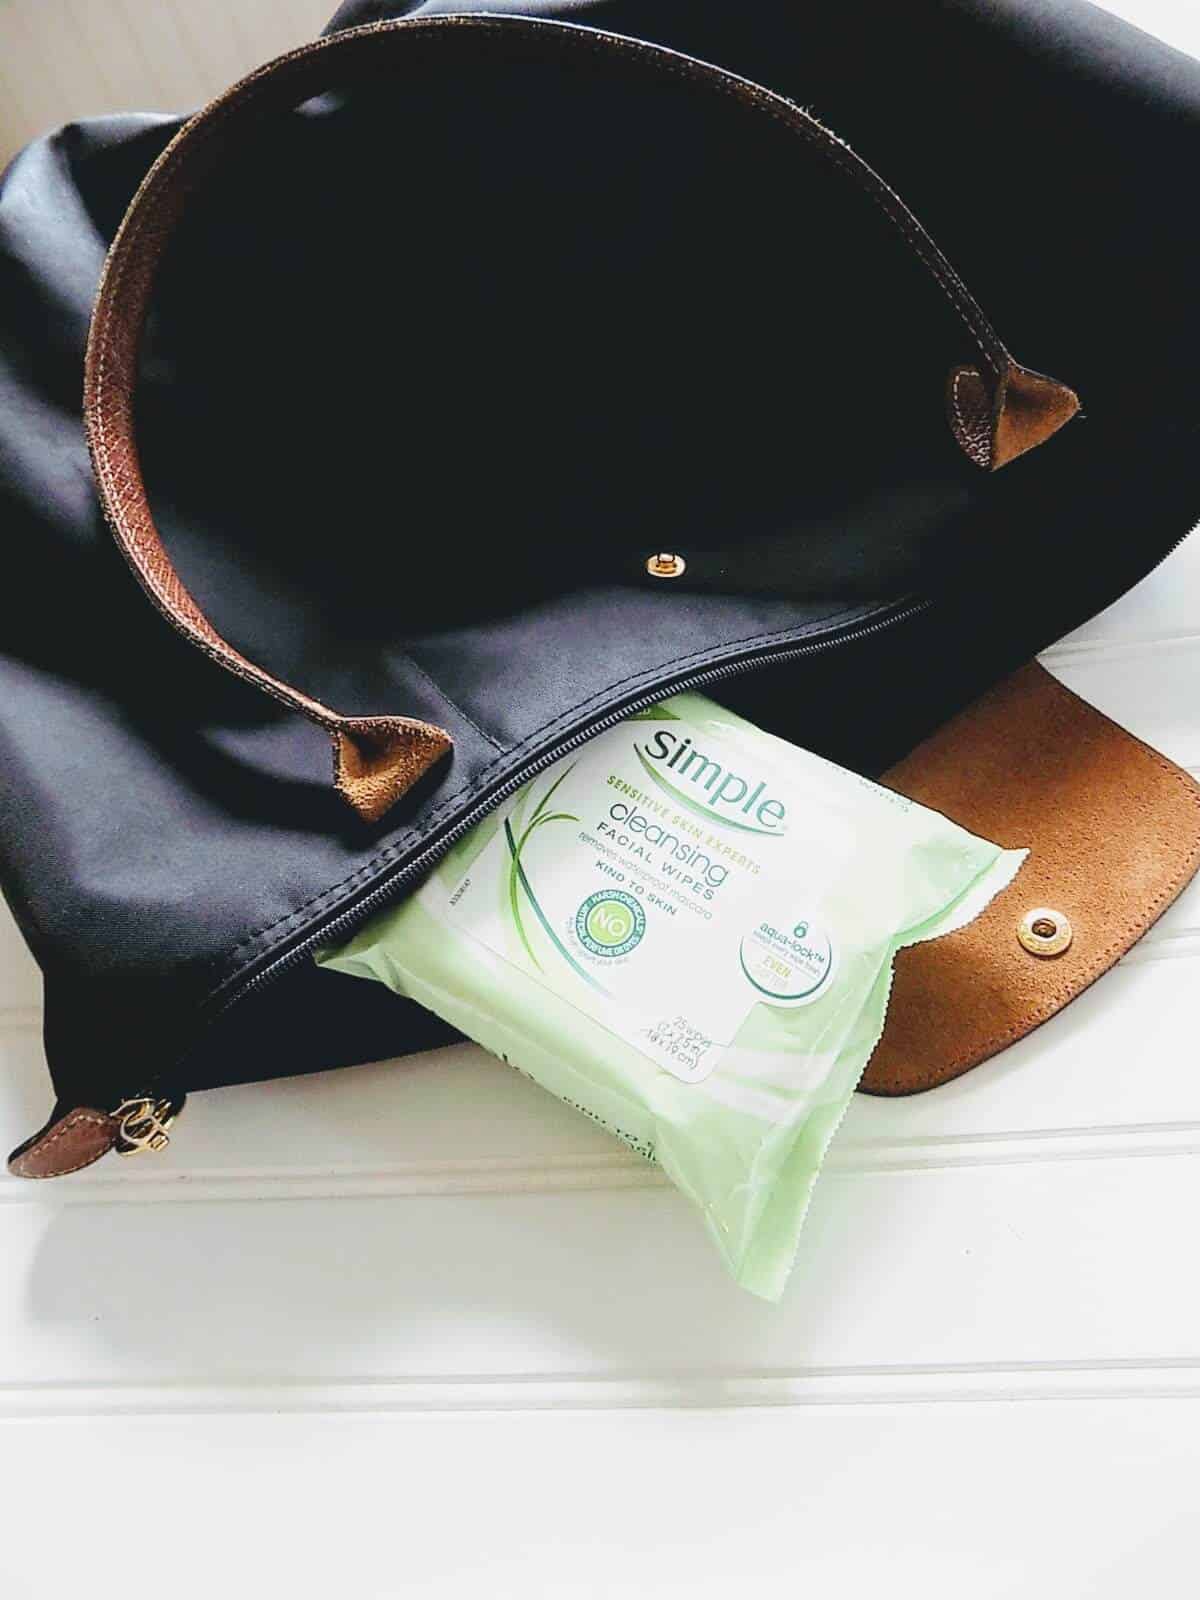 Cleansing wipes in mom bag.